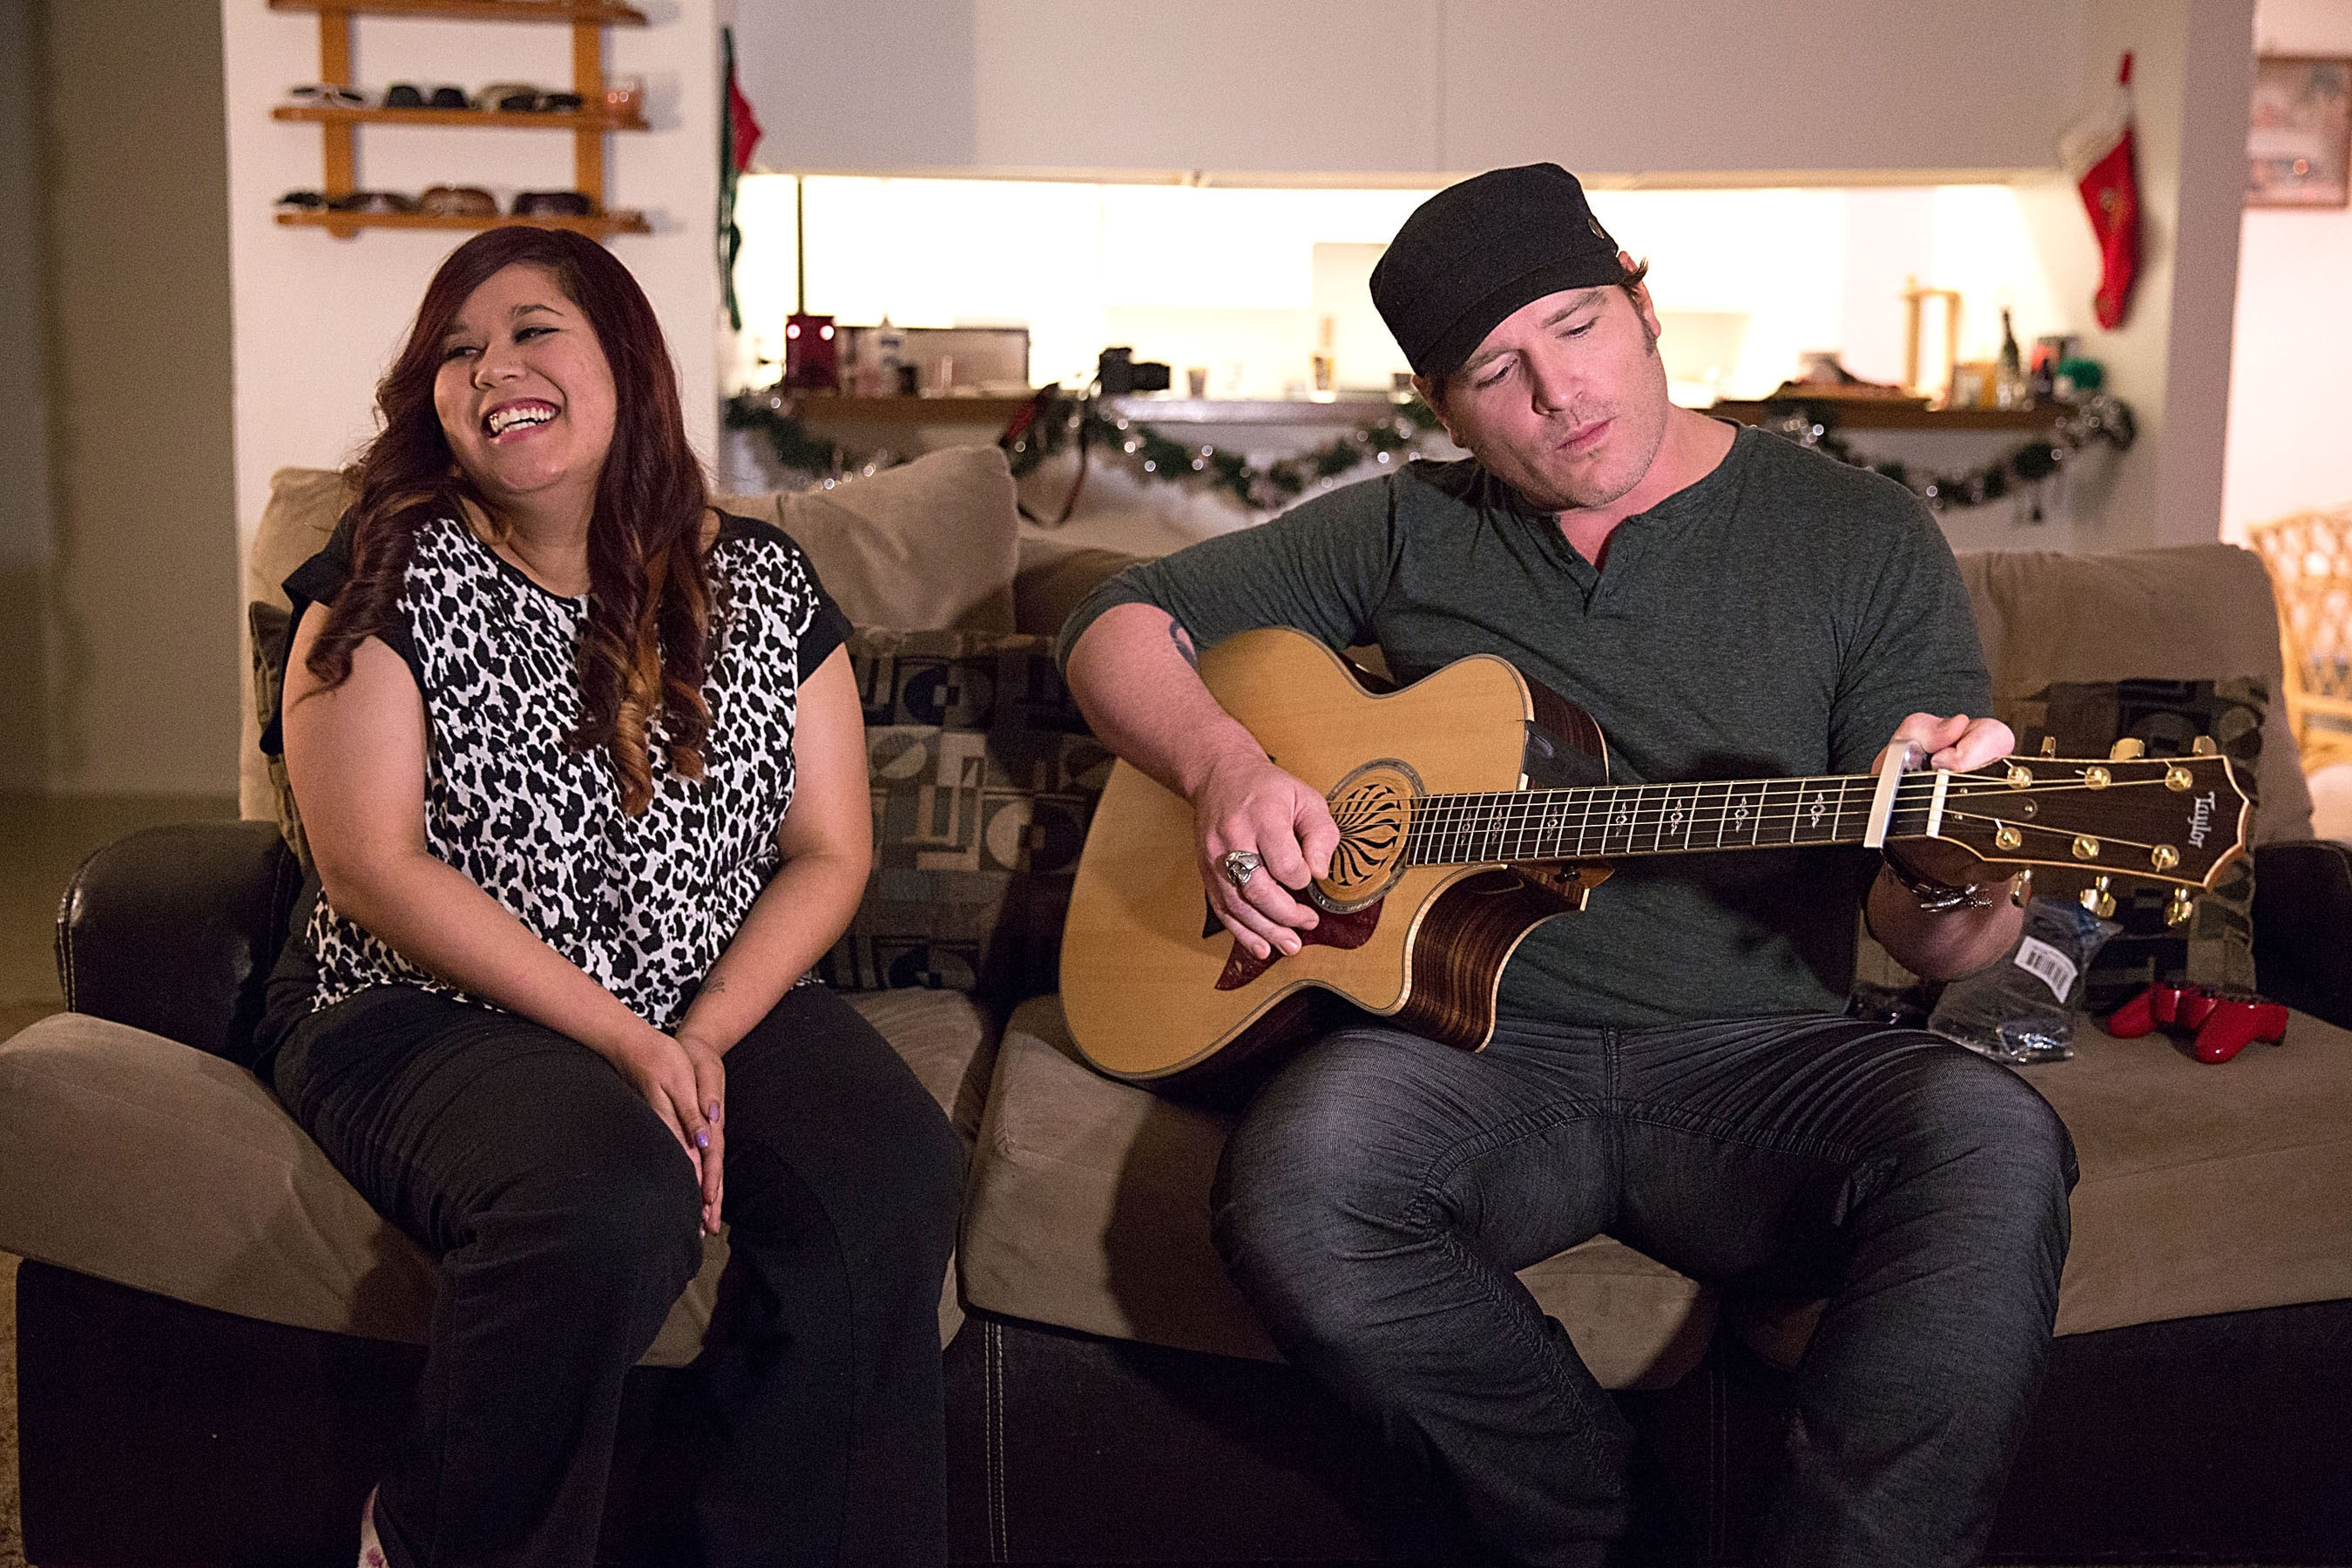 Jerrod Niemann surprises San Antonio fan with a private morning concert in her living room in response to her tweeting "@Jerrod Niemann, good morning. It's 6:40 am, do you think the neighbors would hate me if I blasted your music right now?" To submit a wish for the chance to have it made into a reality, visit www.Facebook.com/ToasterStrudel and click on "Morning Movers." (PRNewsFoto/Pillsbury Toaster Strudel) (PRNewsFoto/PILLSBURY TOASTER STRUDEL)